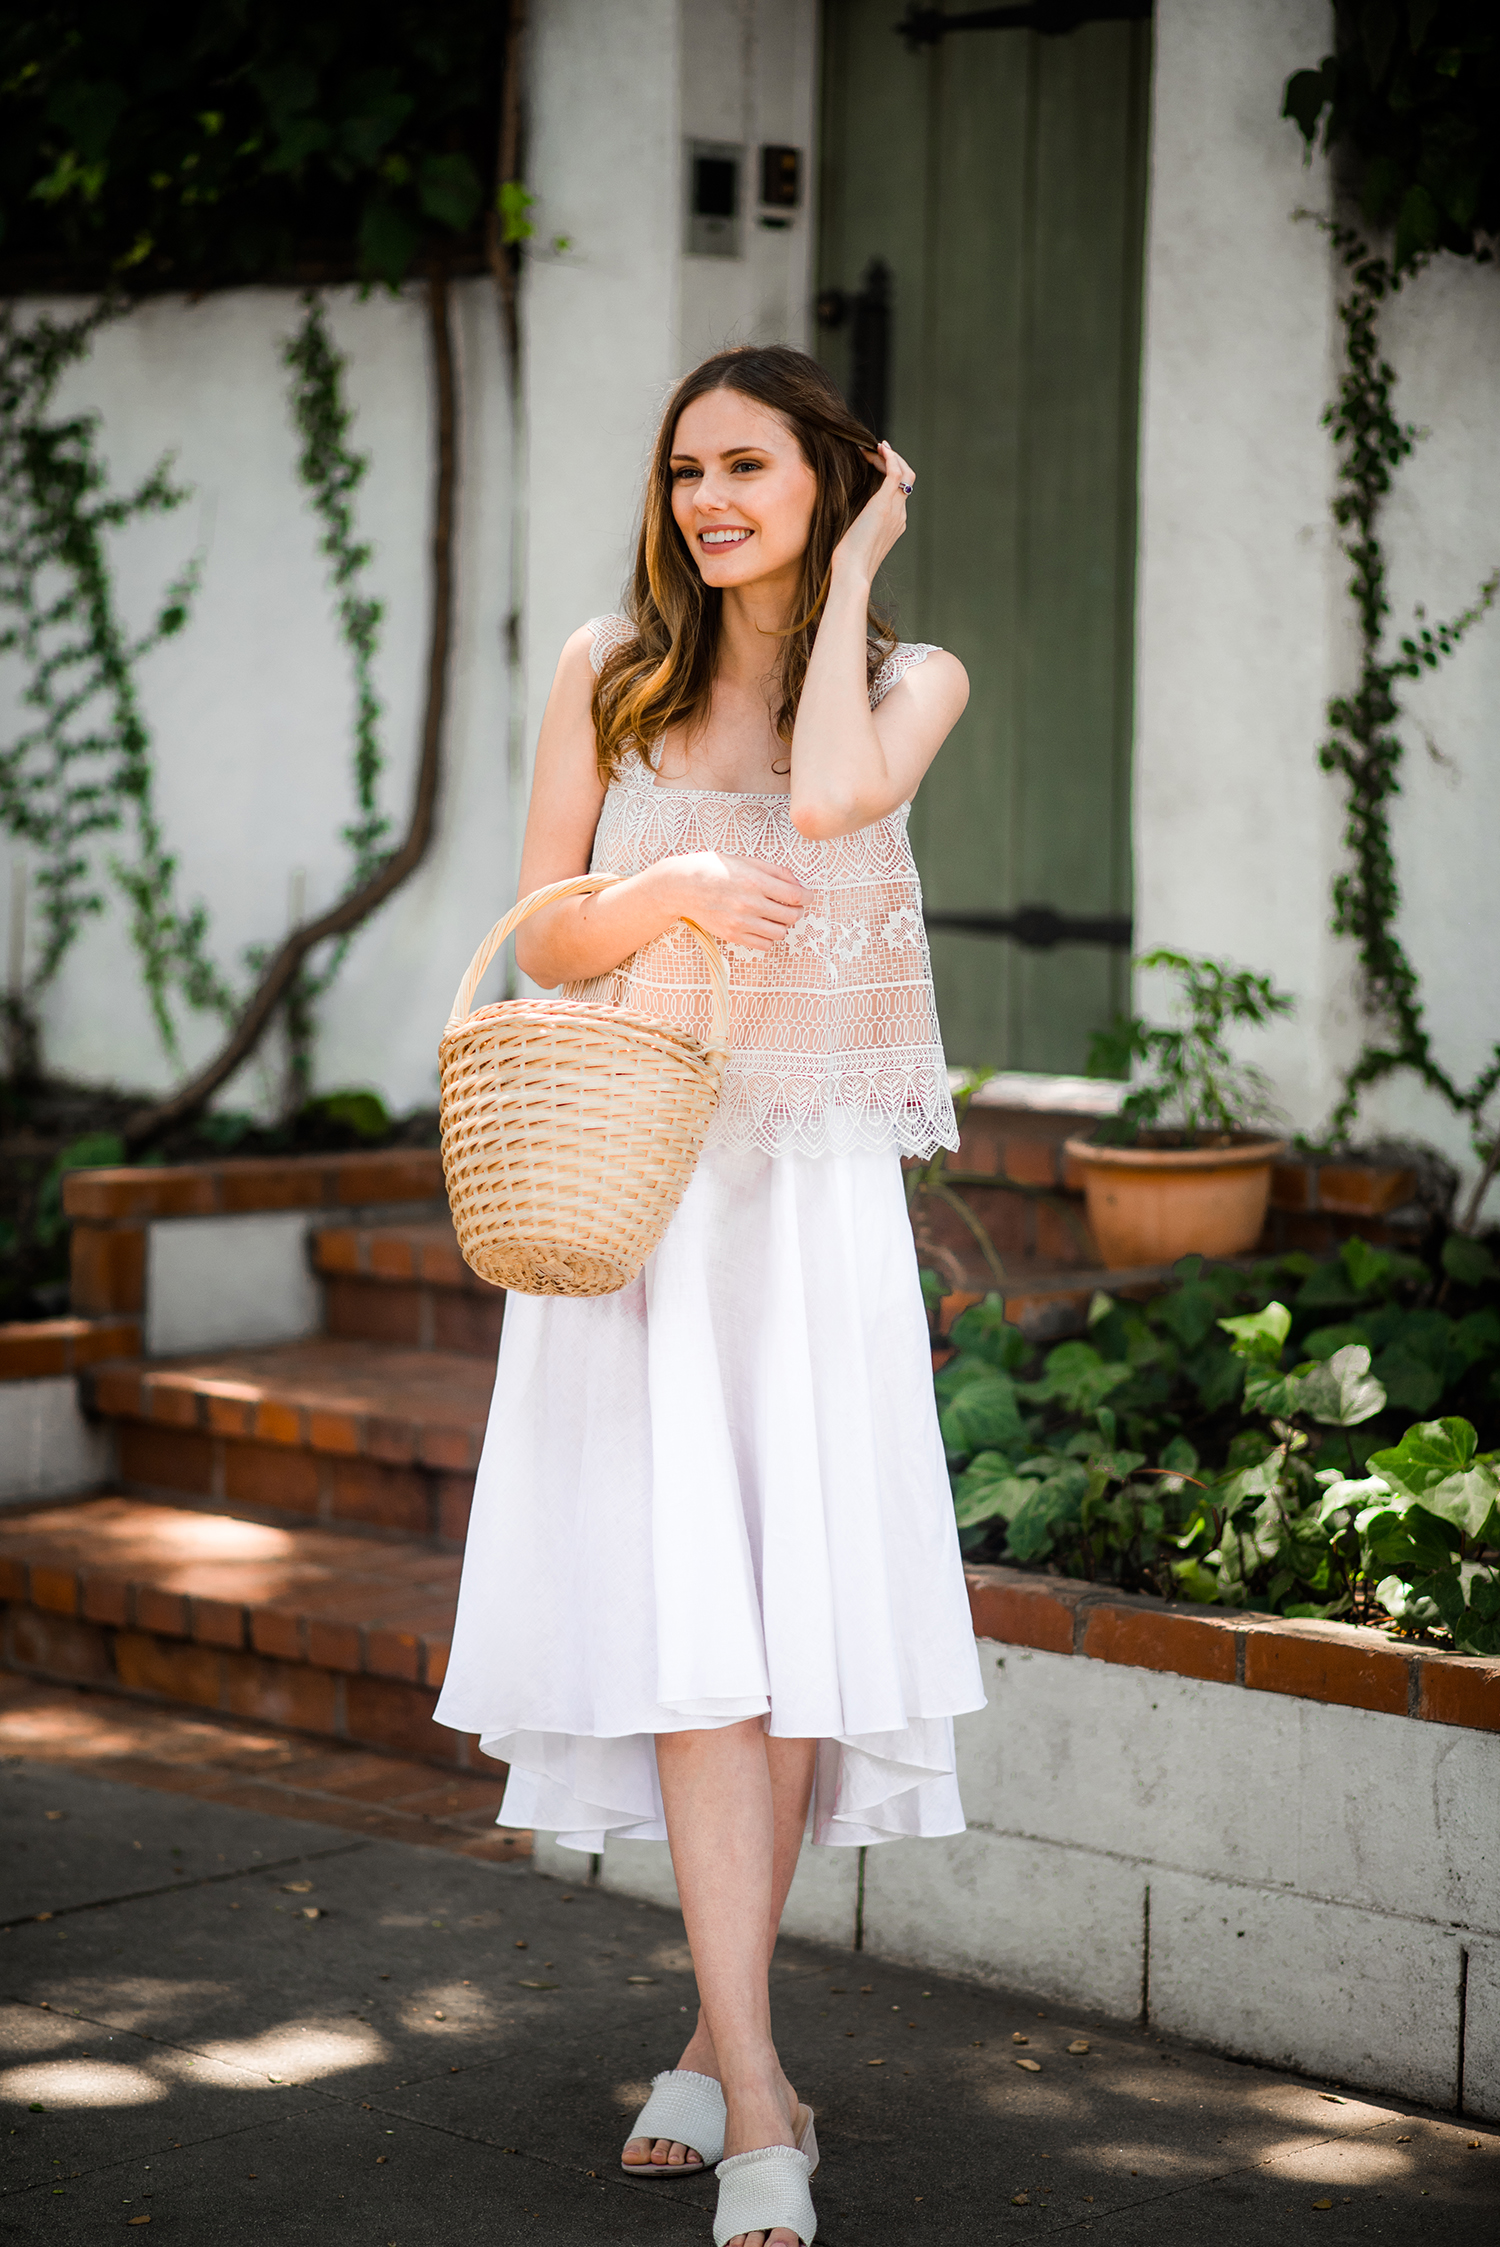 Alyssa Campanella The A List blog Summer Skirt Guide in Miguelina Gale skirt